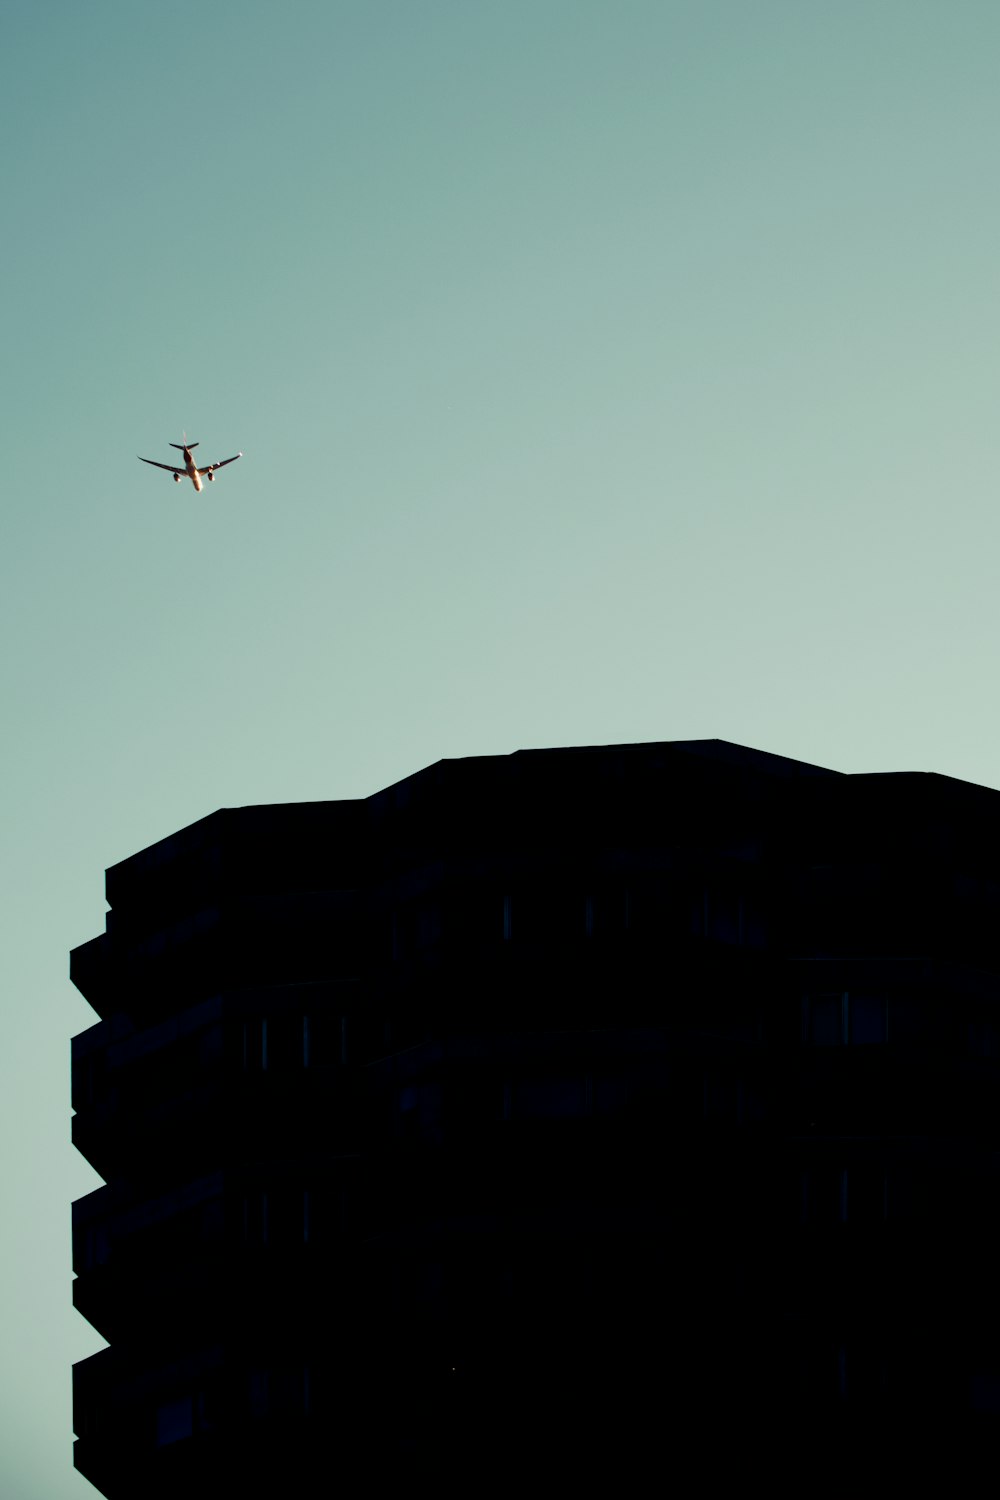 an airplane flying in the sky over a building